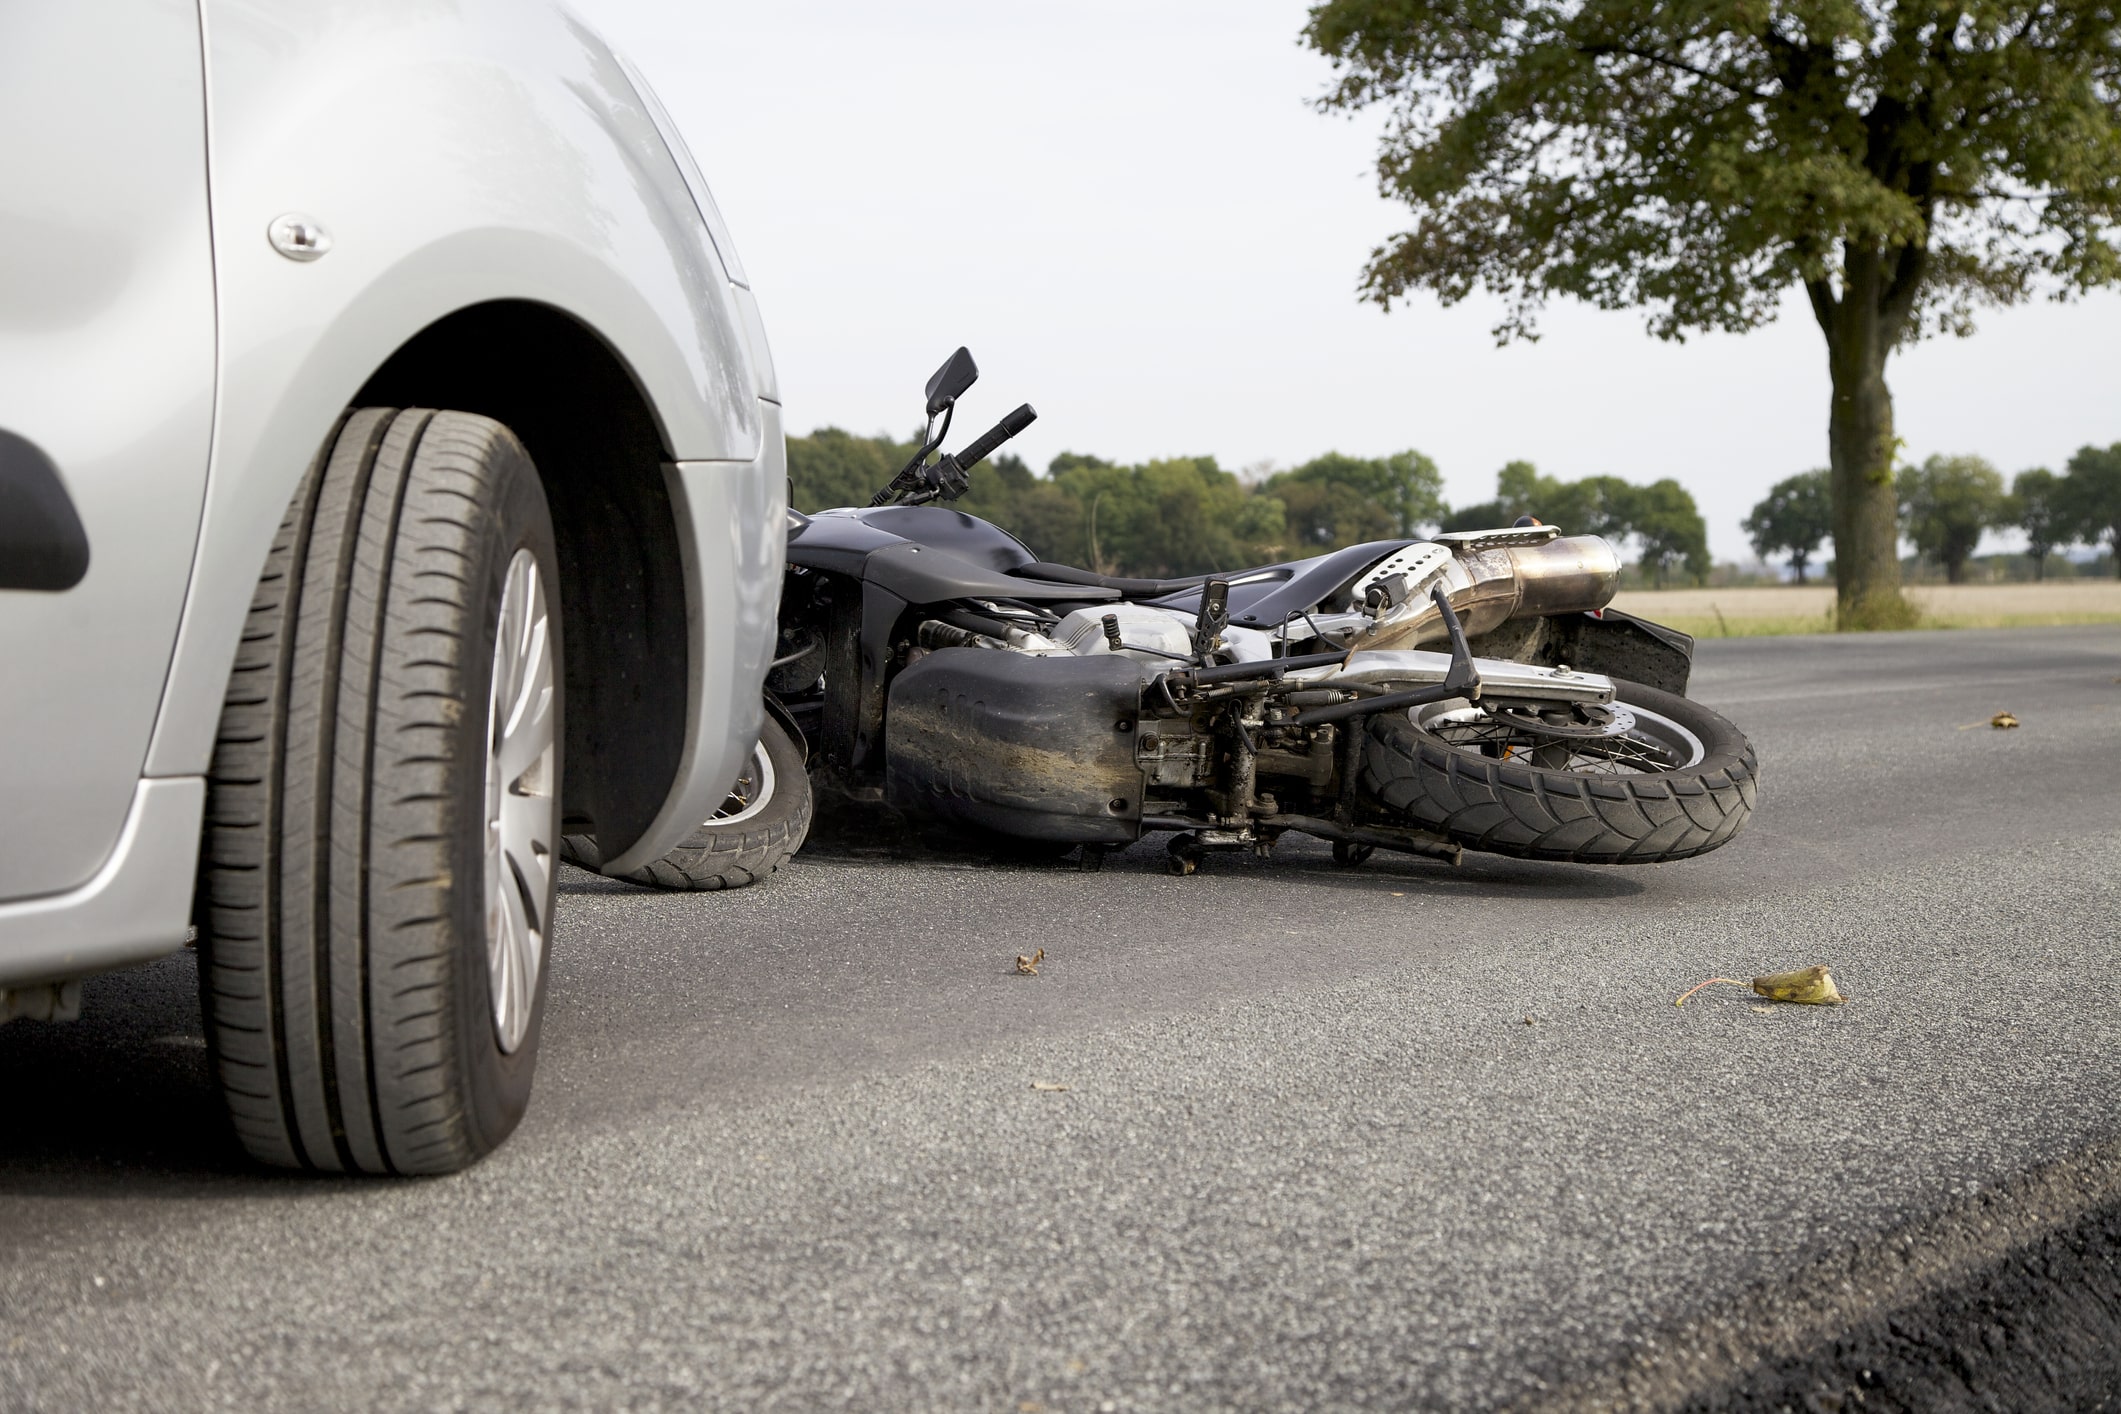 The aftermath of a Millbrook motorcycle accident is seen, with a bike lying down in the road next to the car that hit it.